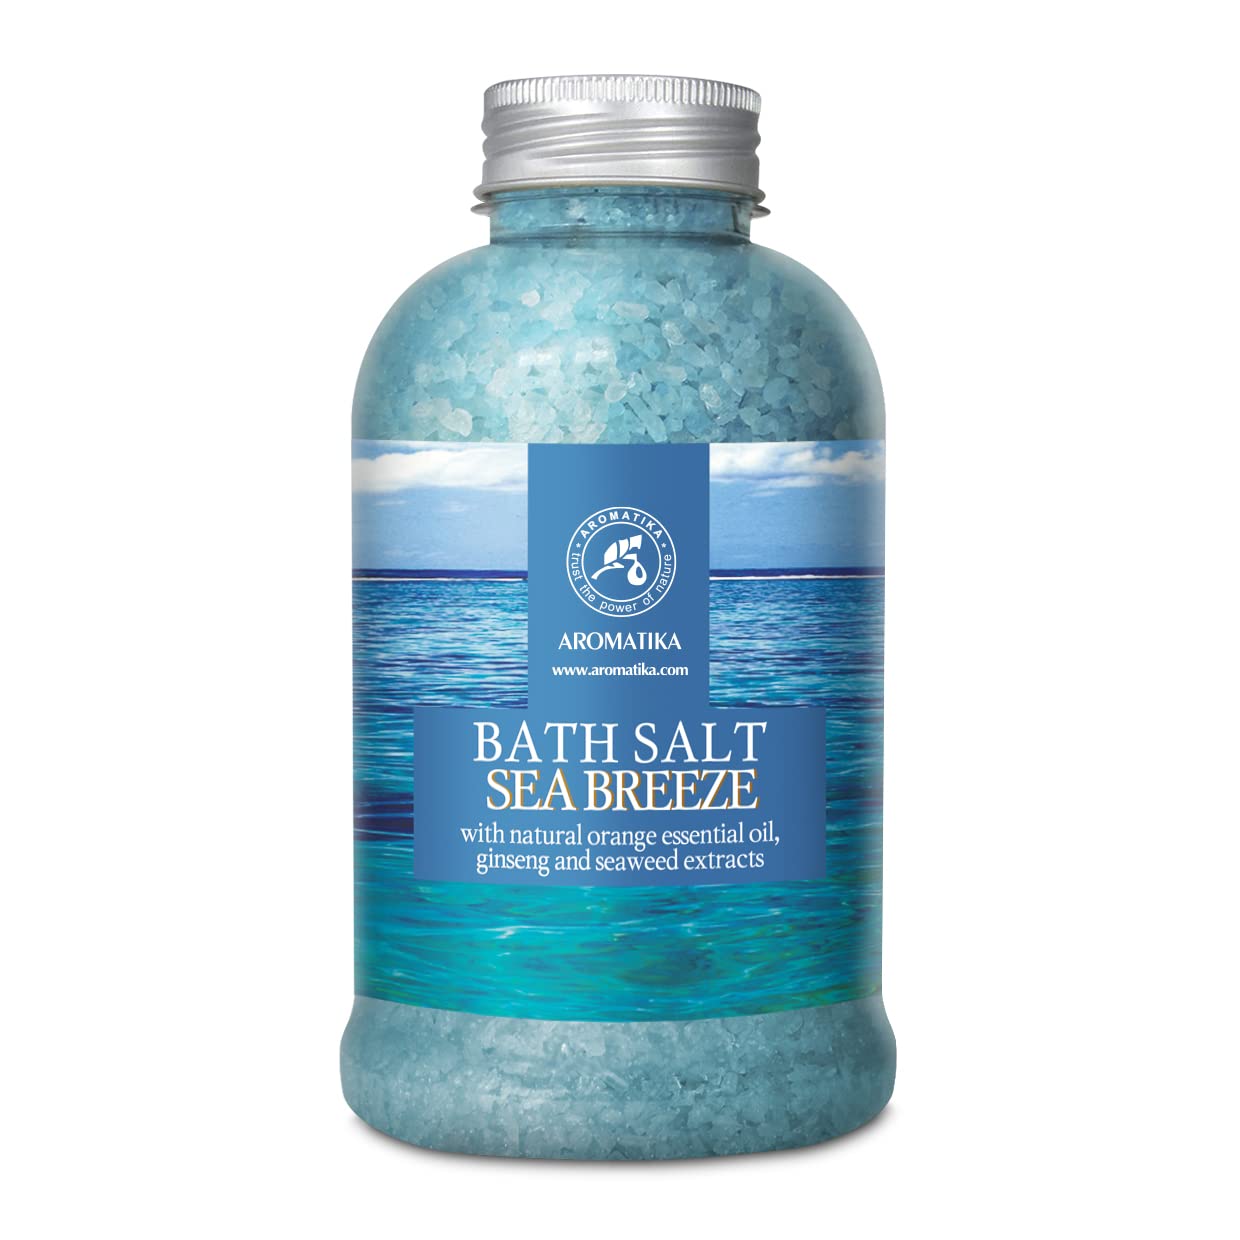 Bath Salt Sea Breeze 21.16 Oz with Natural Essential Oils Orange & Ginseng & Seaweed - Best for Good Sleep - Relaxing - Calming - Body Care - Beauty - Aromatherapy